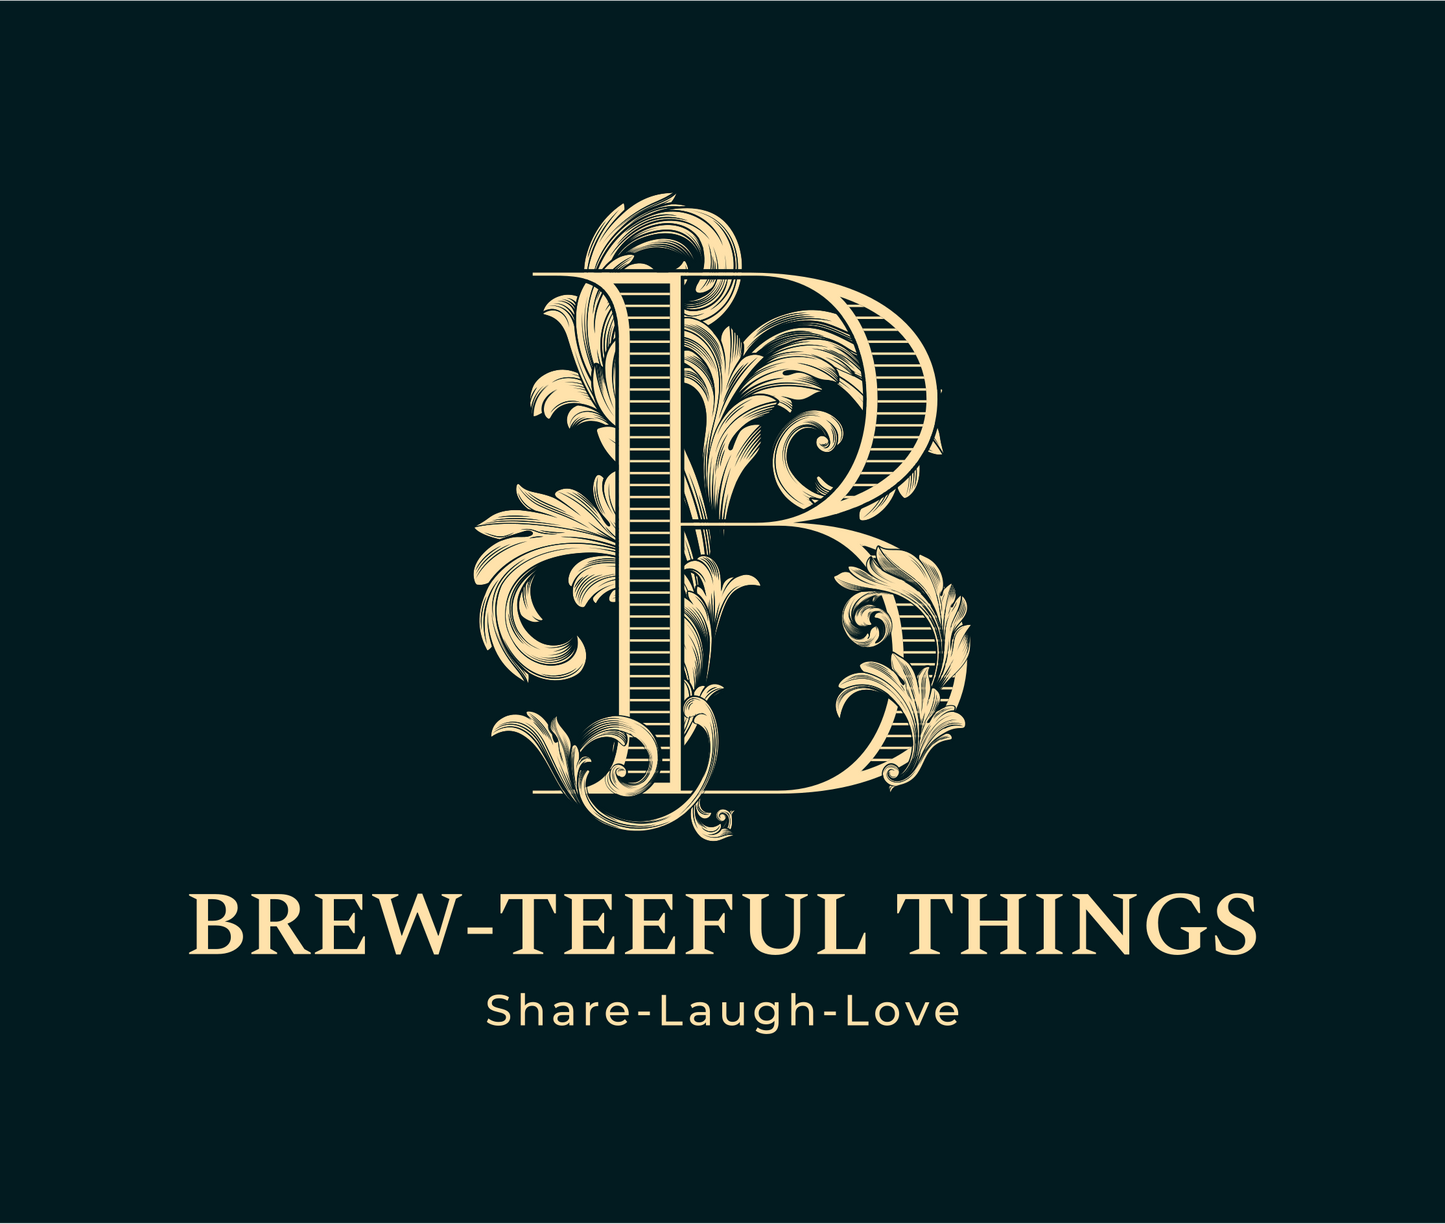 "Brew-teeful things" Gift Card